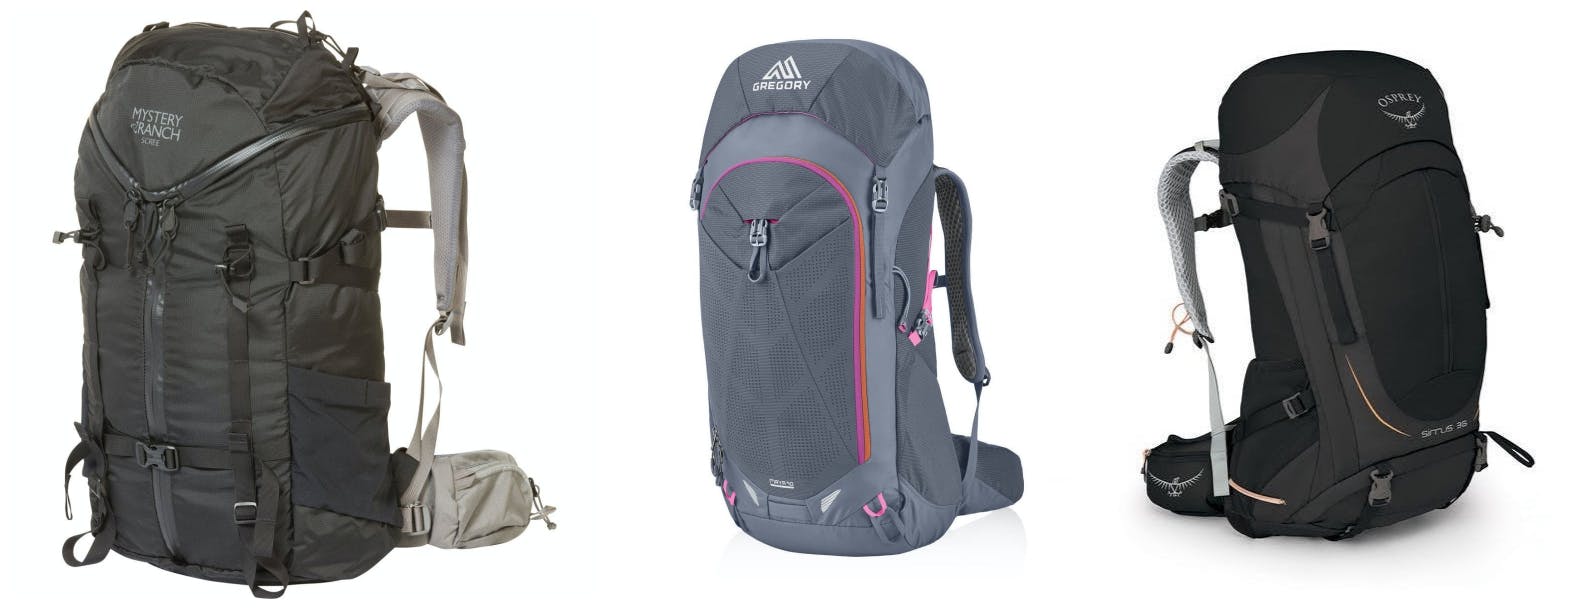 Three backpack product photos side by side: two grey packs and a black pack